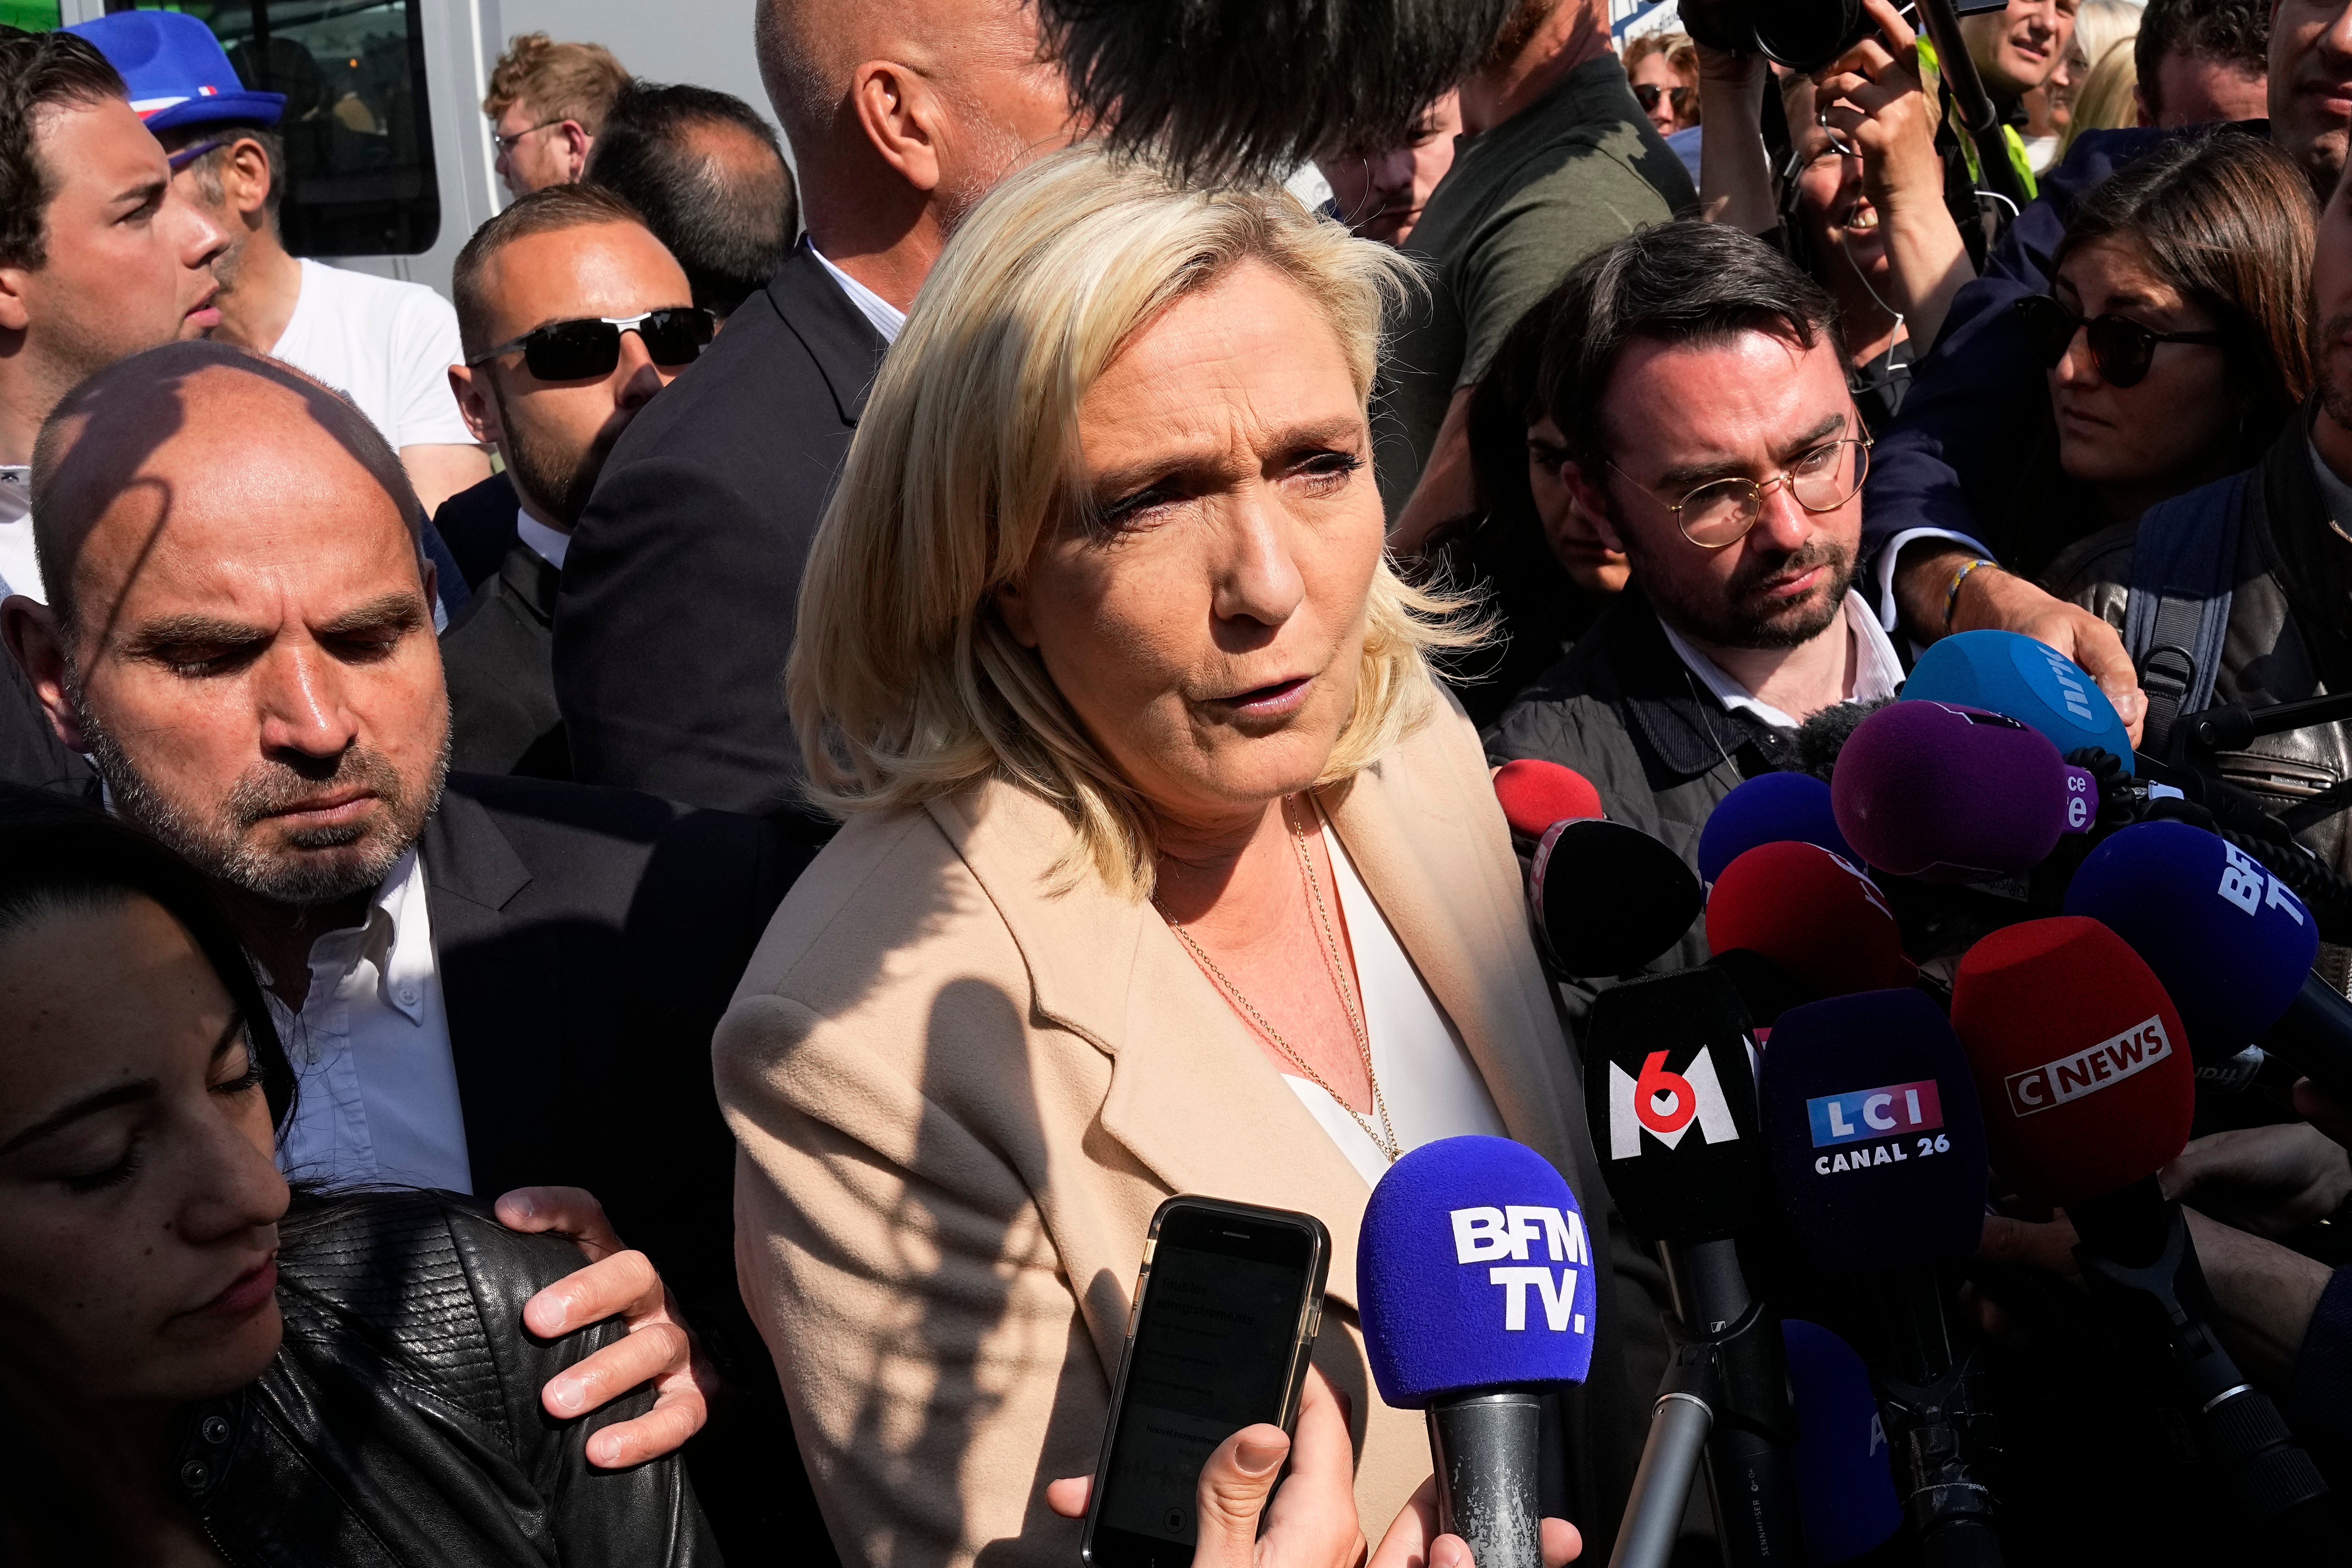 Marine Le Pen answers reporters as she campaigns at a street market in Etaples, northern France.